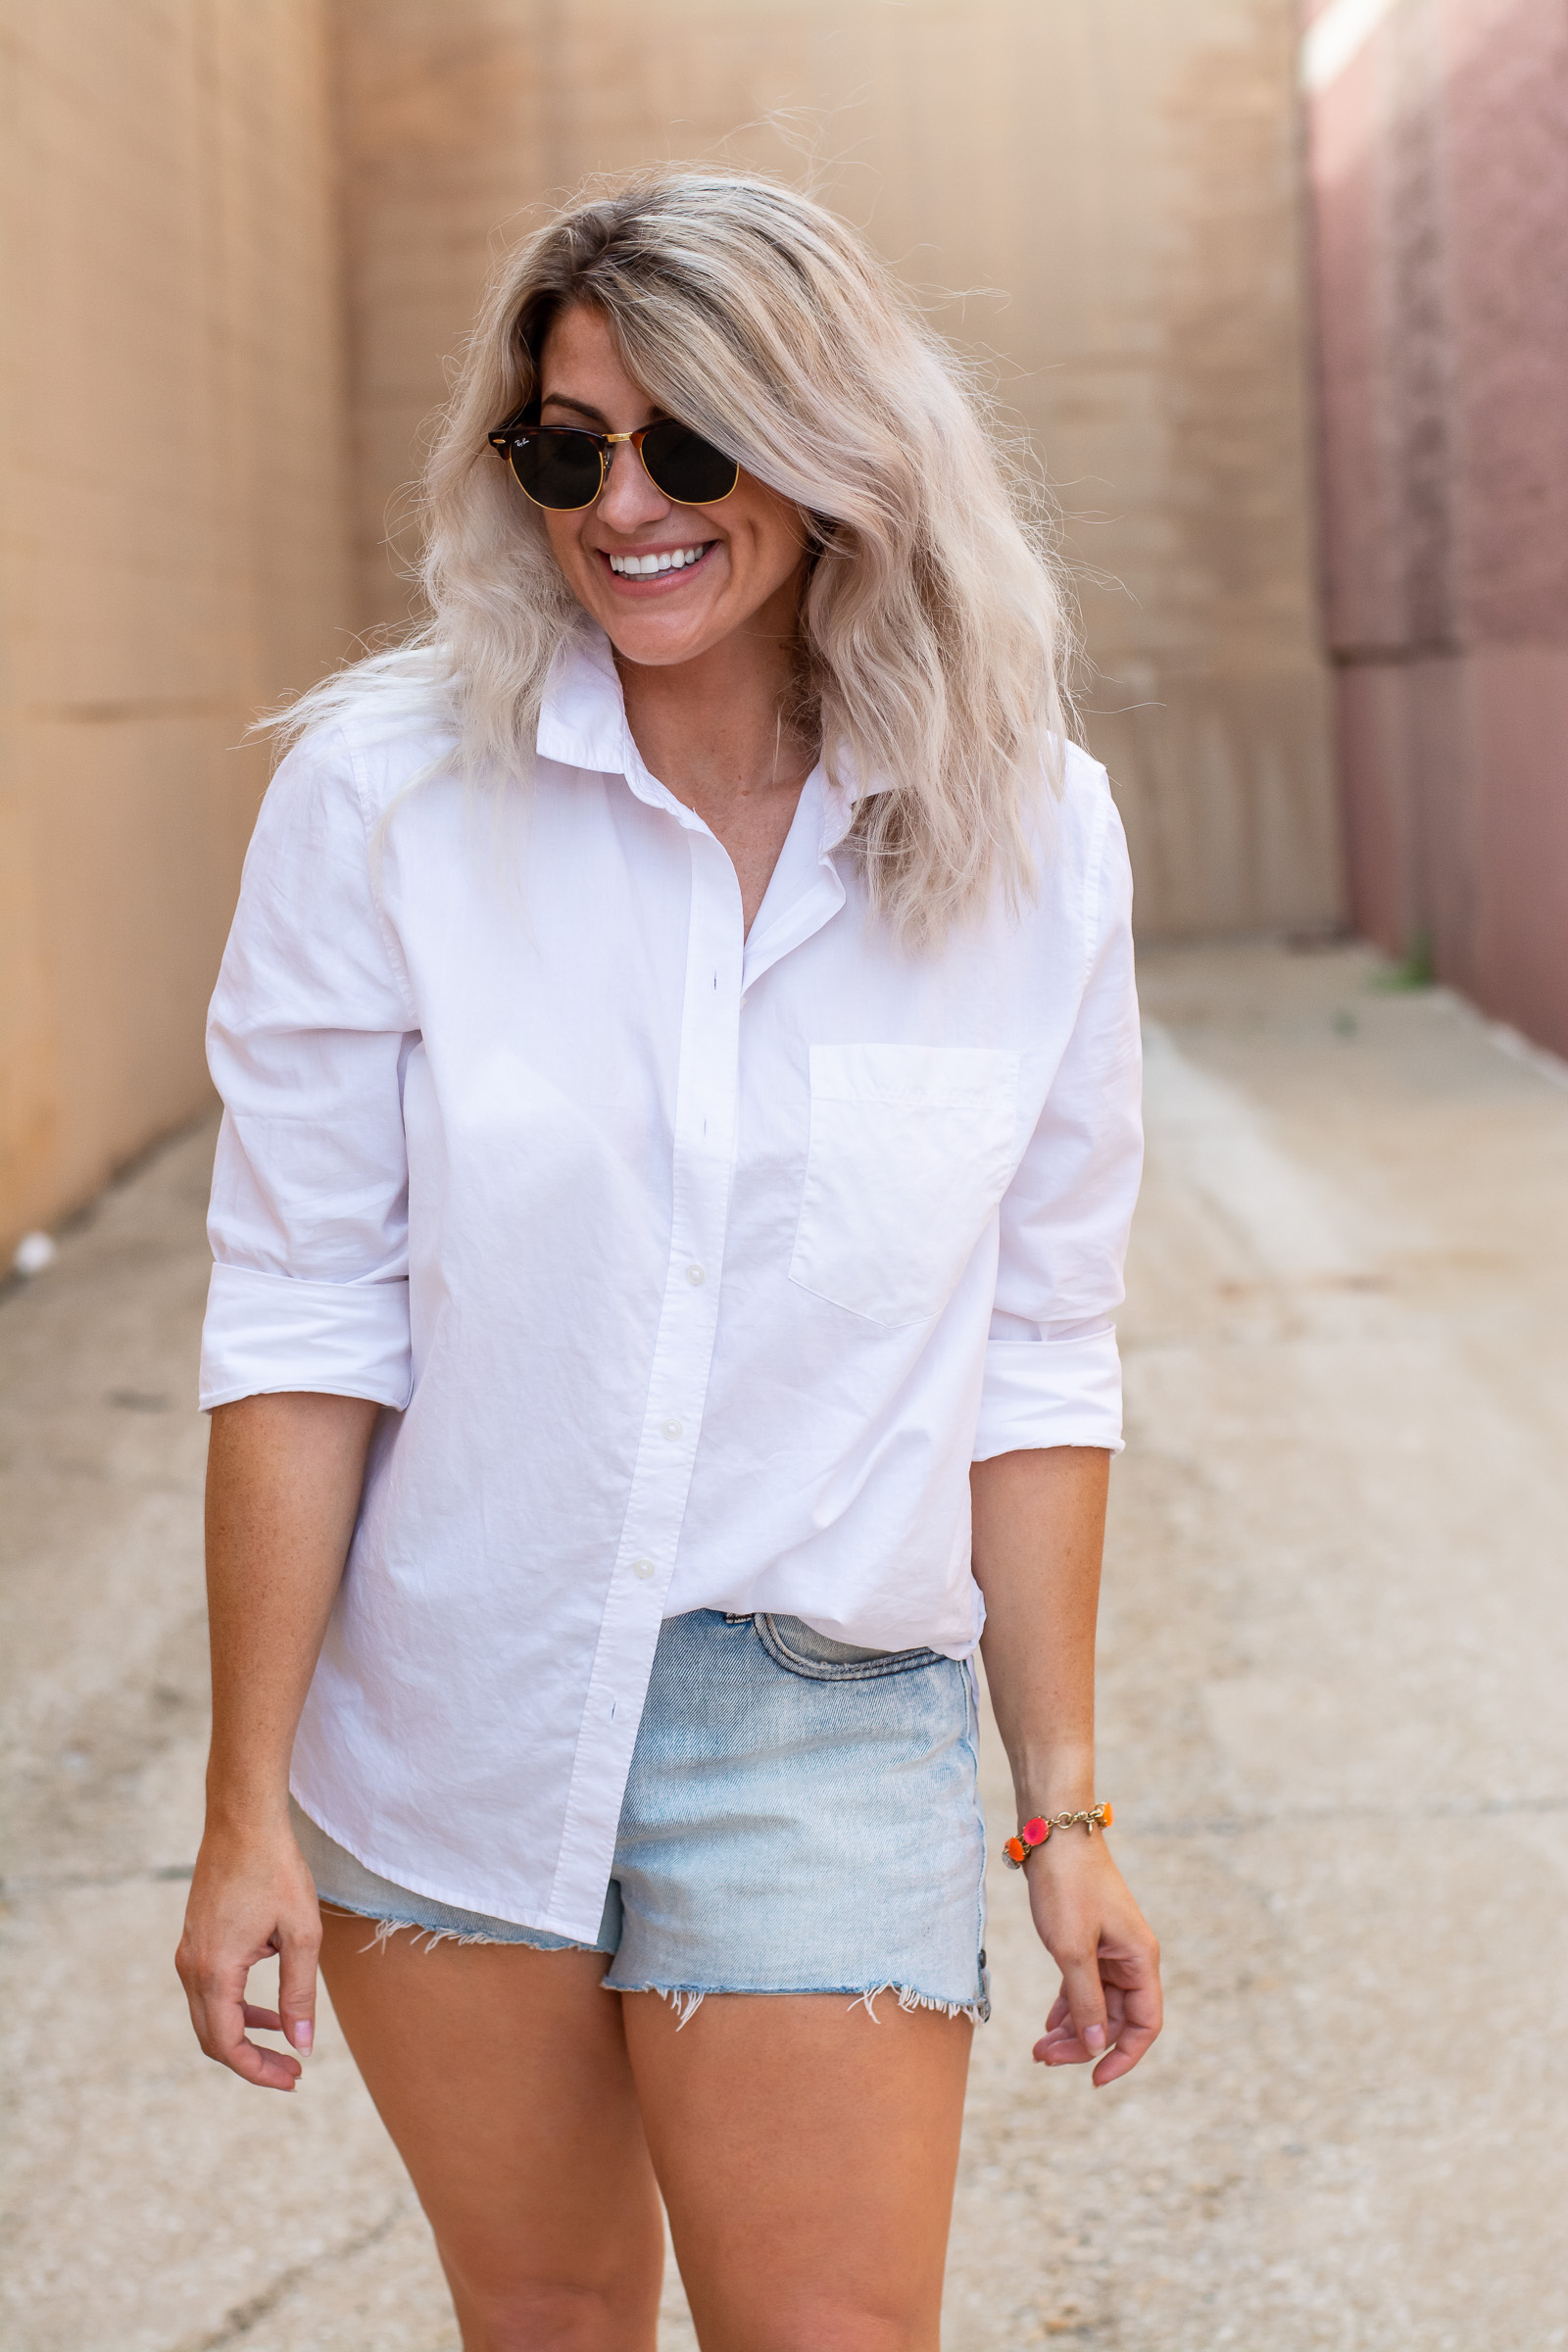 Styling an Oversized White Button-up. | LSR